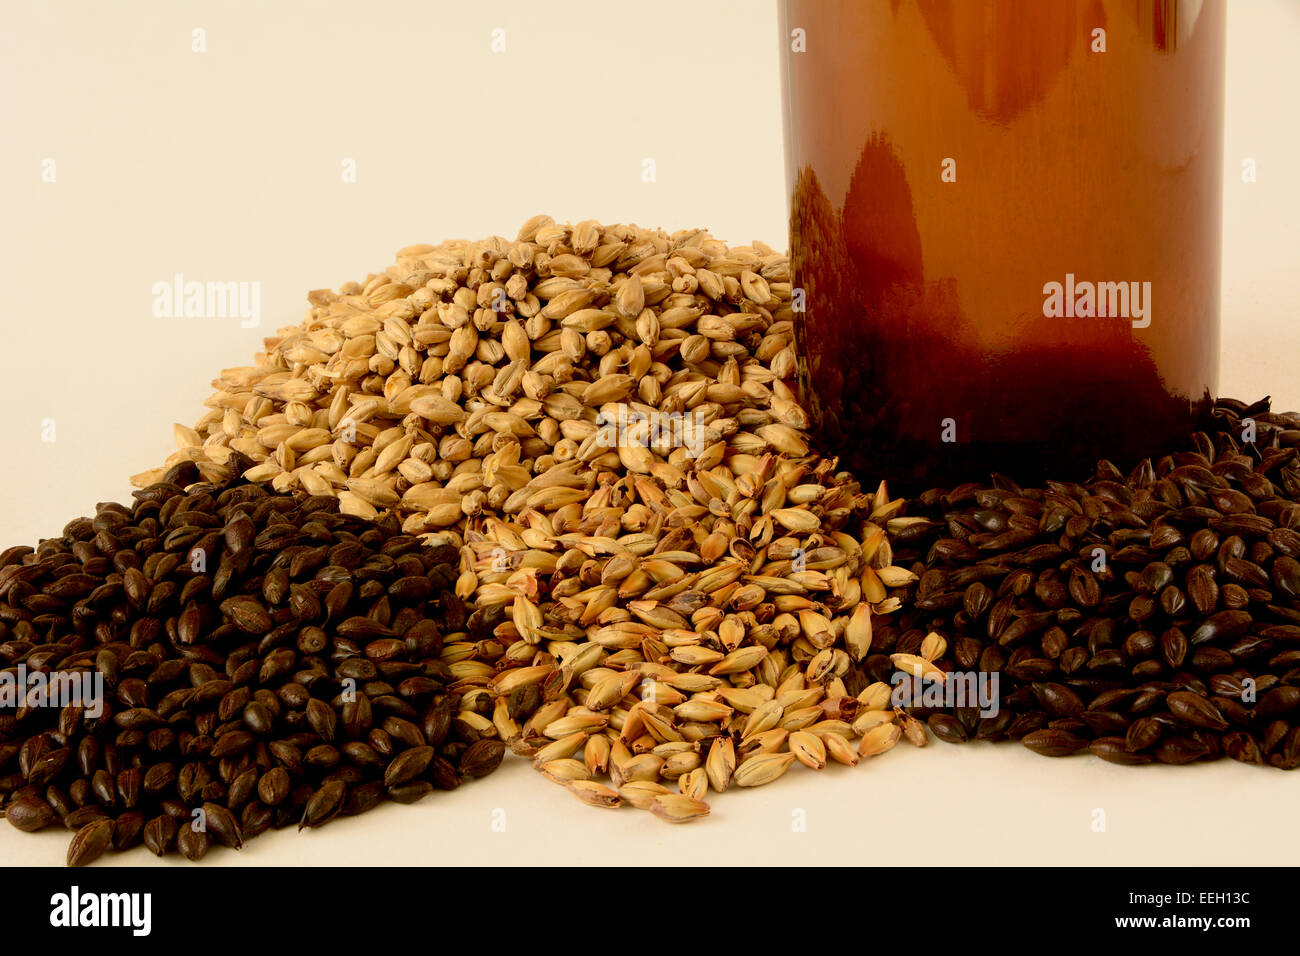 Grains used for craft brewing beer and stout at home Stock Photo